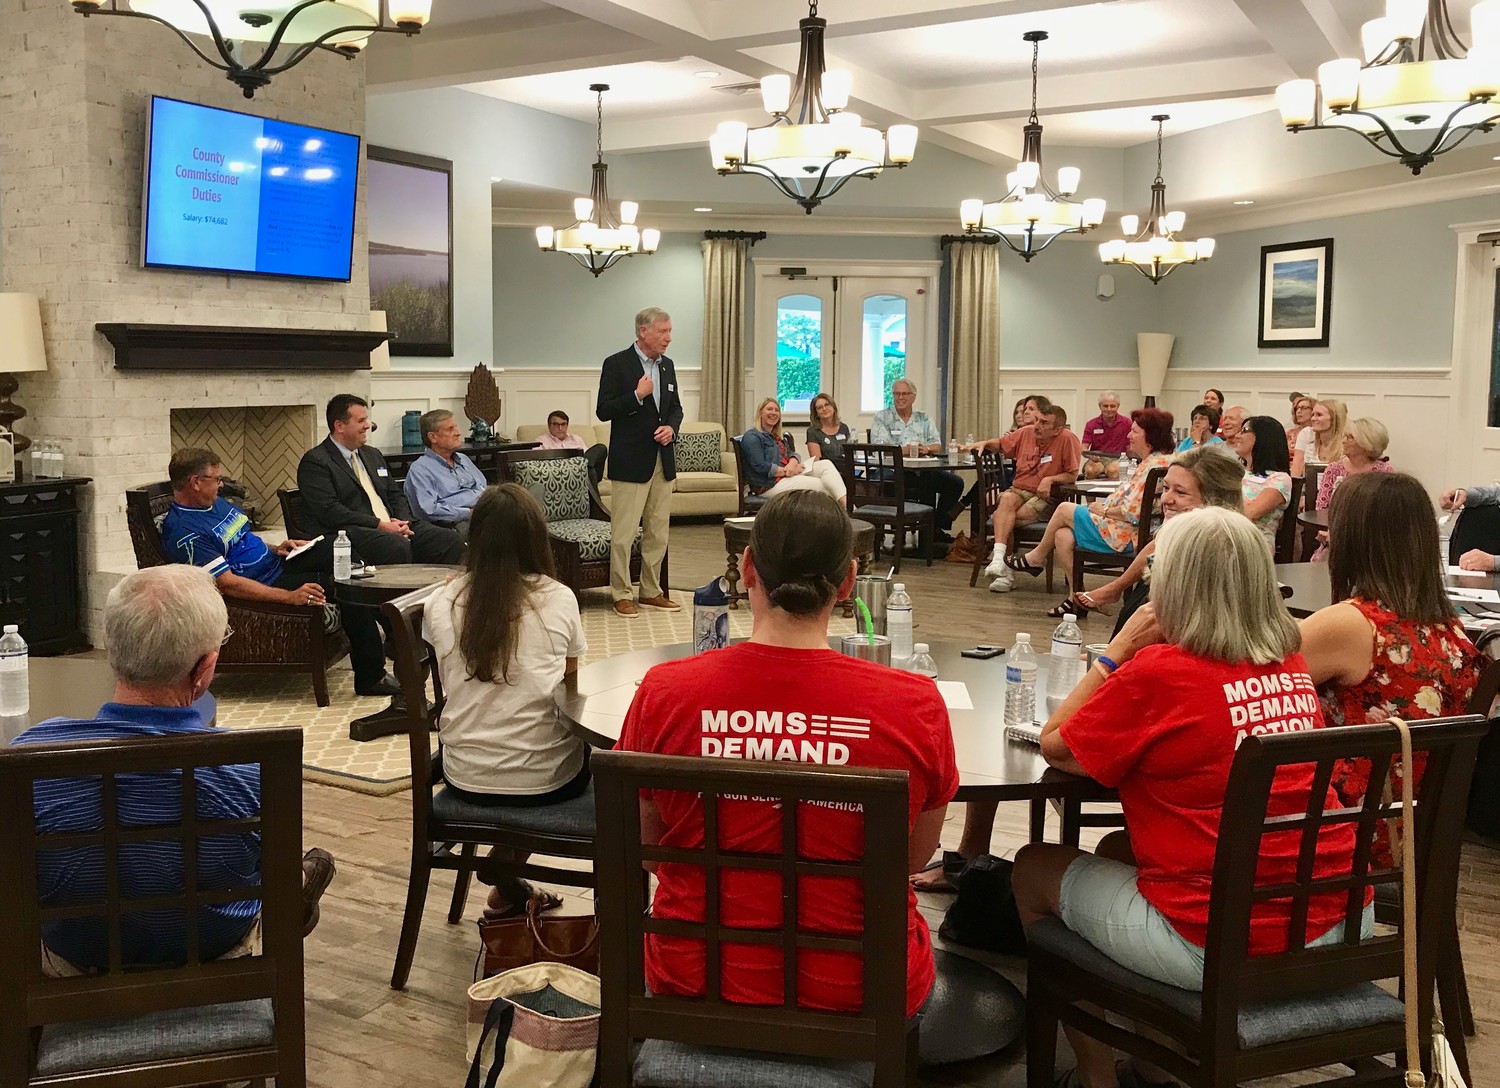 County Commission District 4 candidate Dick Williams addresses attendees of the Meet the Candidates event June 27 hosted by the St. Johns County chapter of Moms Demand Action for Gun Sense in America.